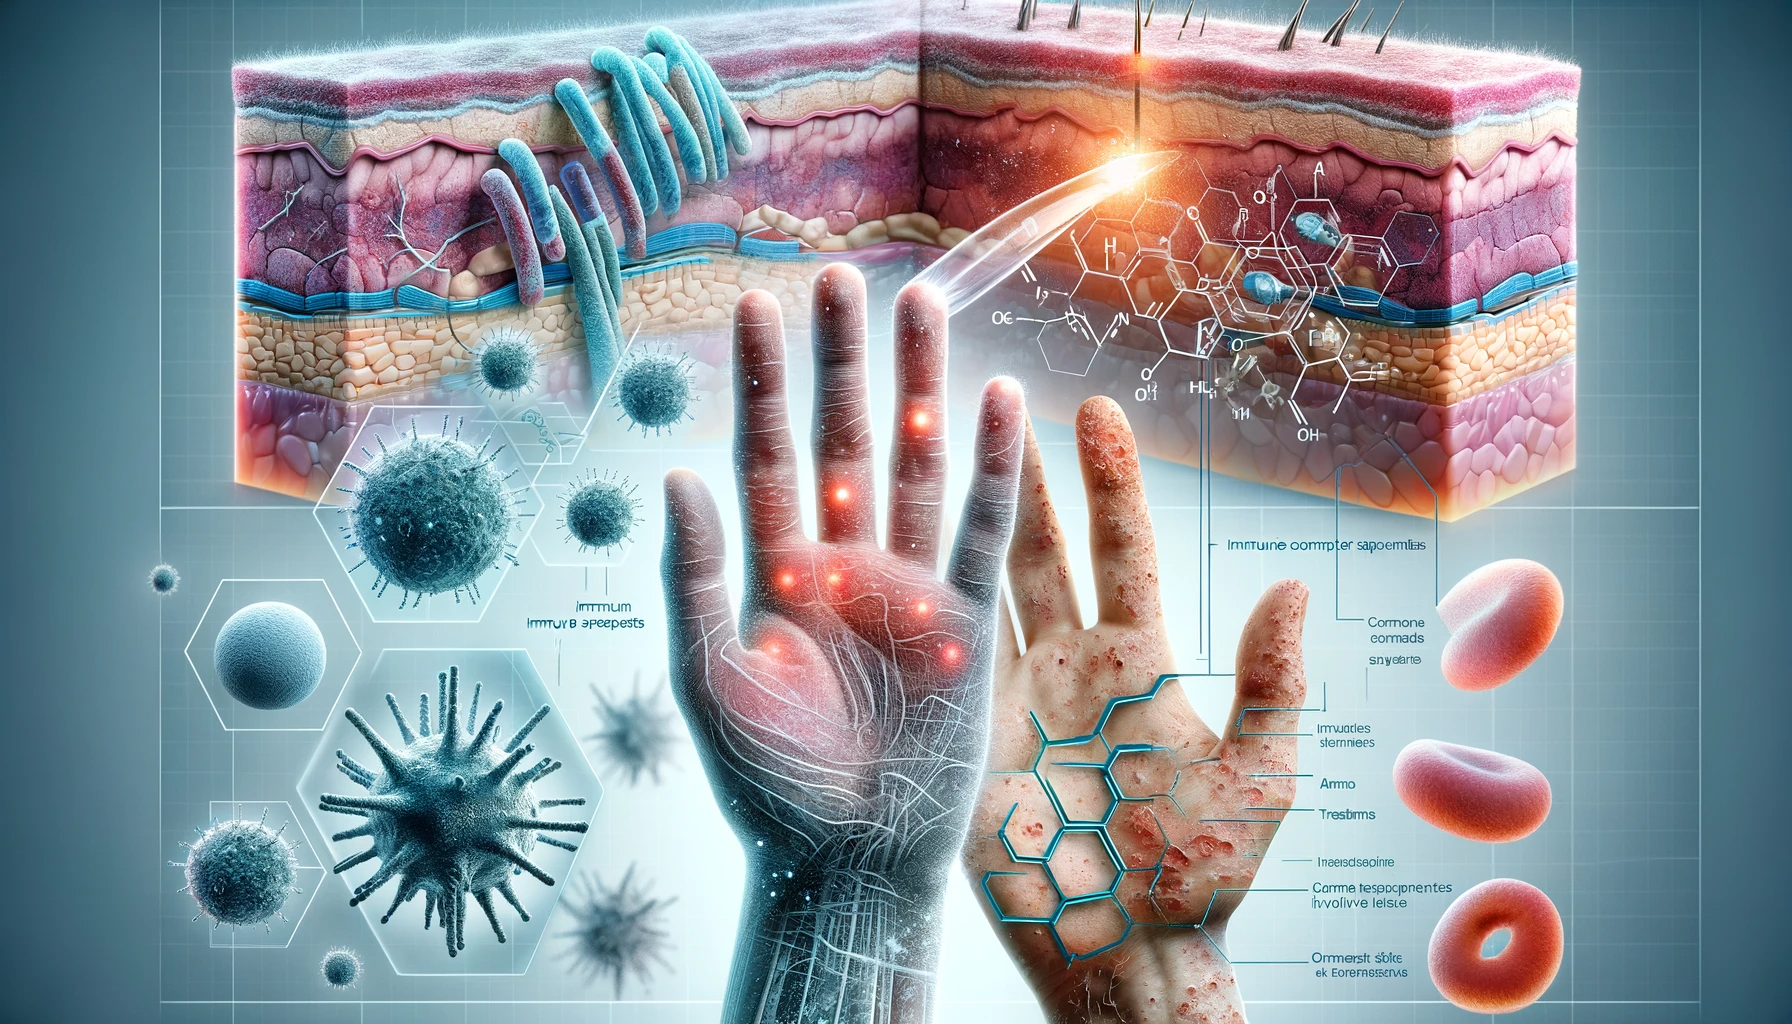 A detailed, educational illustration representing the science behind eczema. On one side of the image, there's a microscopic view of skin layers, vividly showing the inflamed and irritated structure typical of eczema, with reddened, swollen tissue. Beside it are molecular structures, symbolizing common treatments and immune responses involved in eczema. Adding a human touch to the scientific depiction, there's an image of a hand with visible eczema symptoms - red, irritated patches on the skin. The overall design merges medical imagery with real-life representation to convey the complexity of eczema.